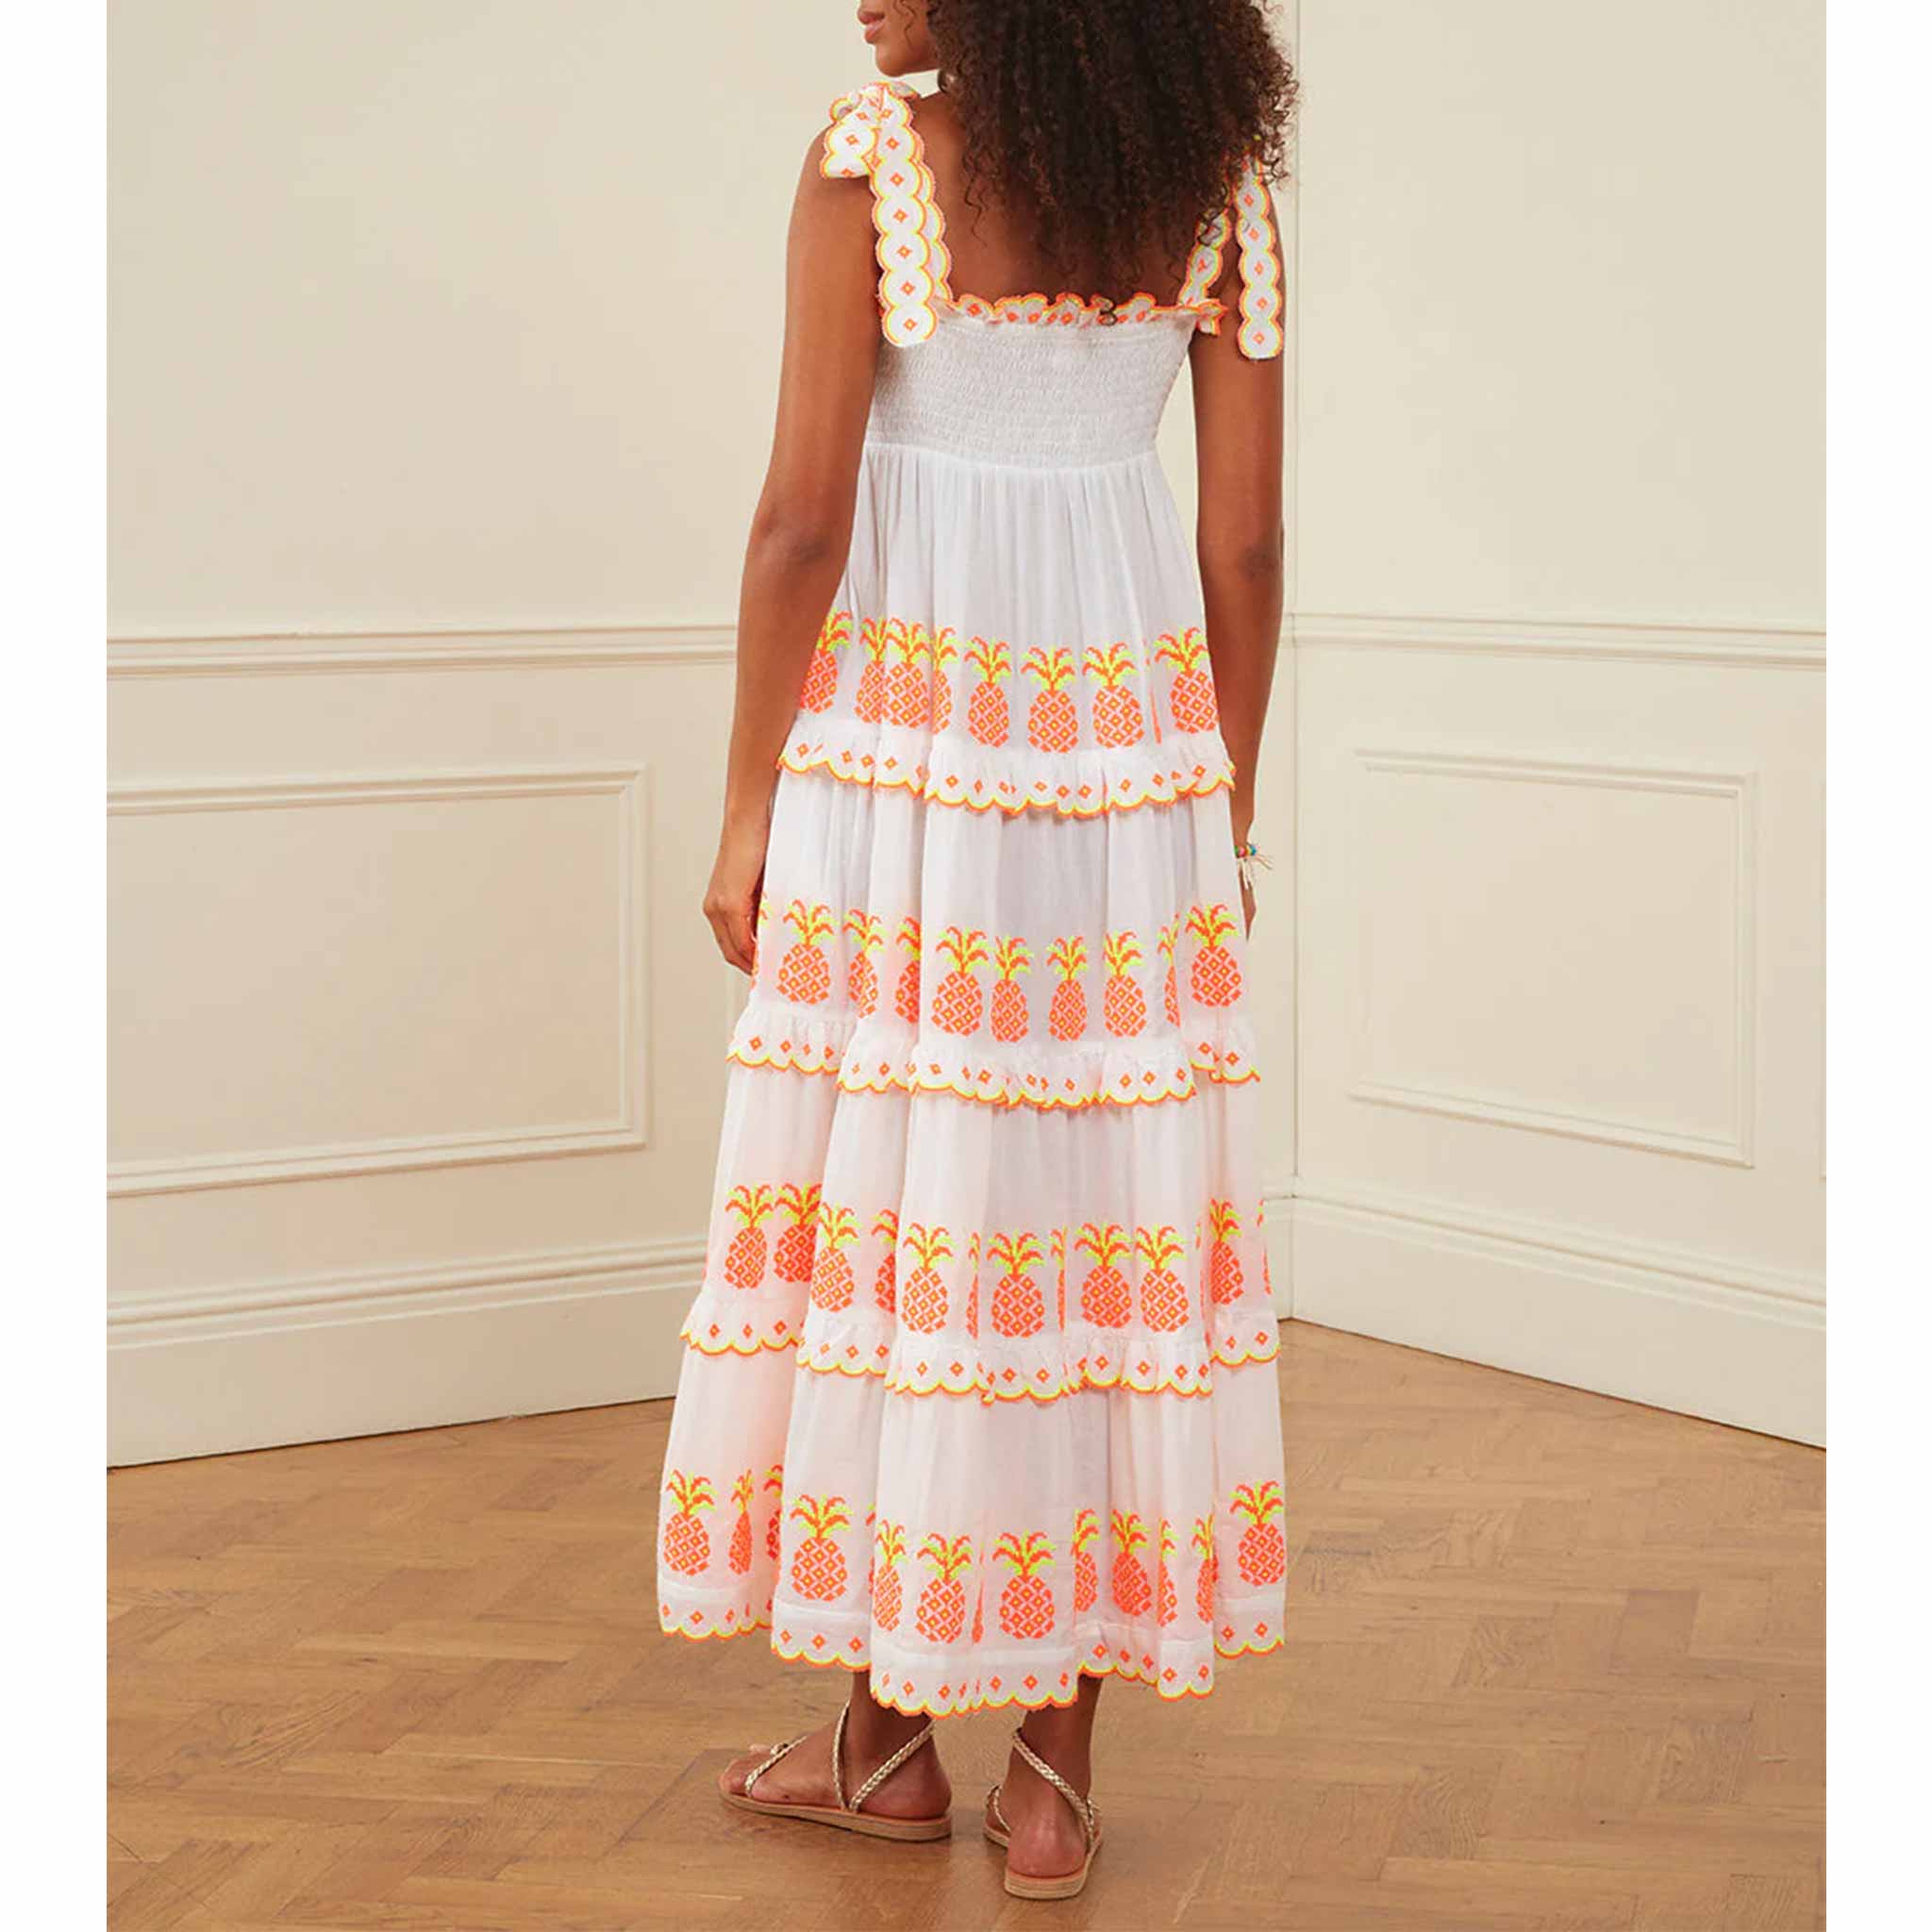 Athens Dress in Pineapple Stitch